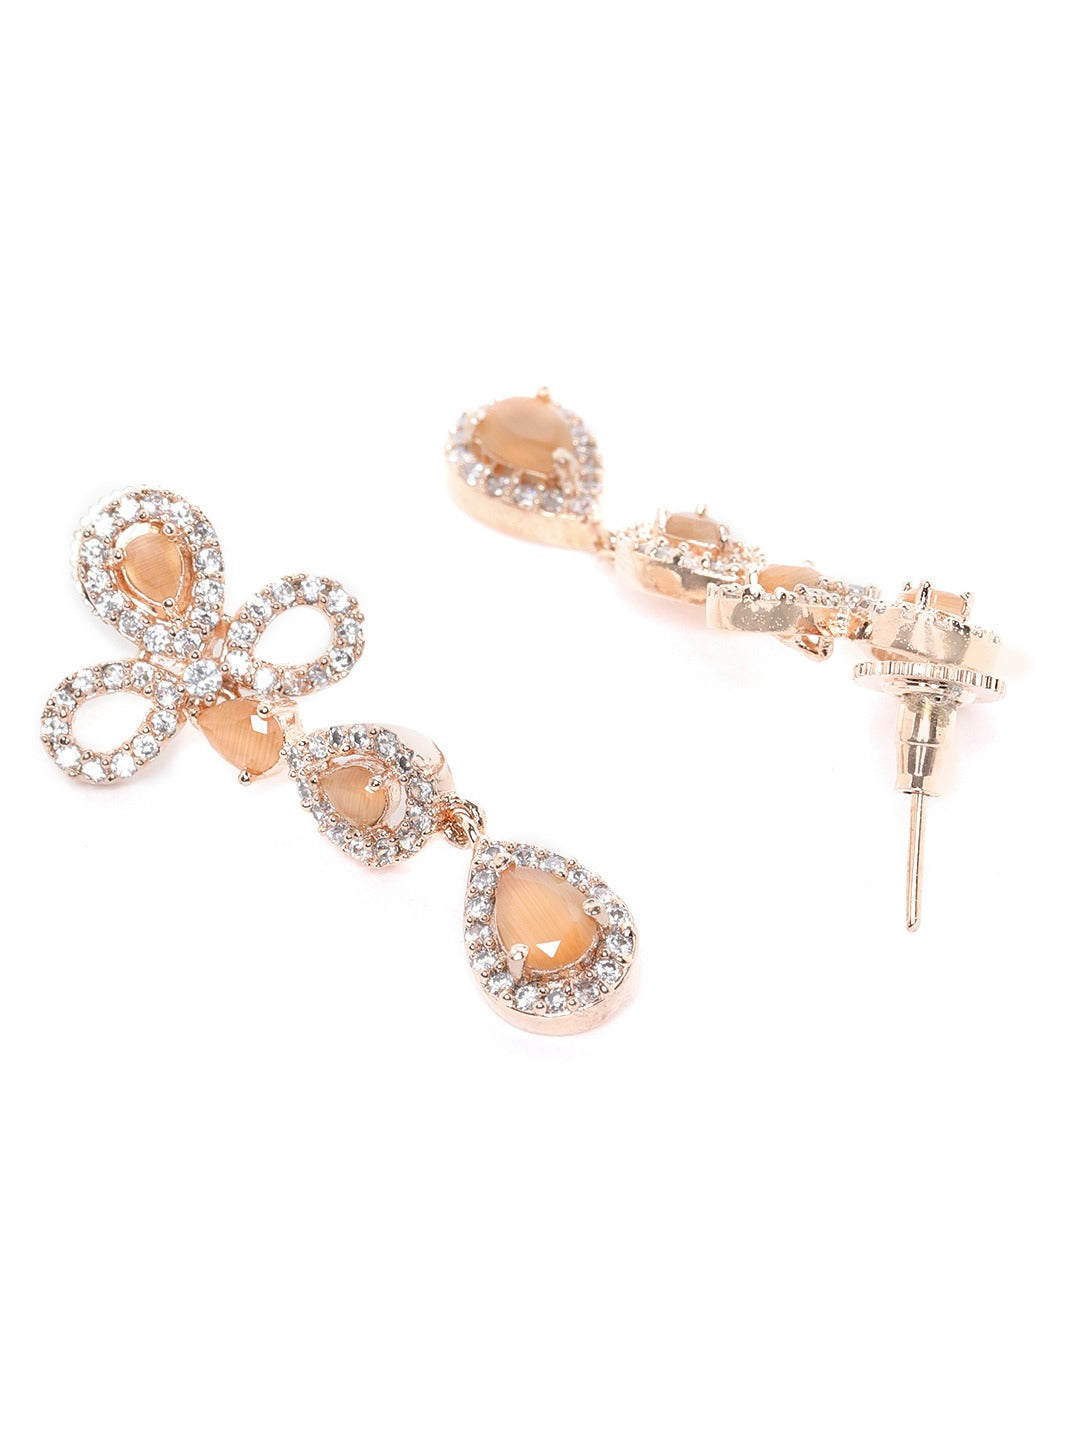 Peach-Coloured Rose Gold-Plated AD-Studded Handcrafted Jewellery Set